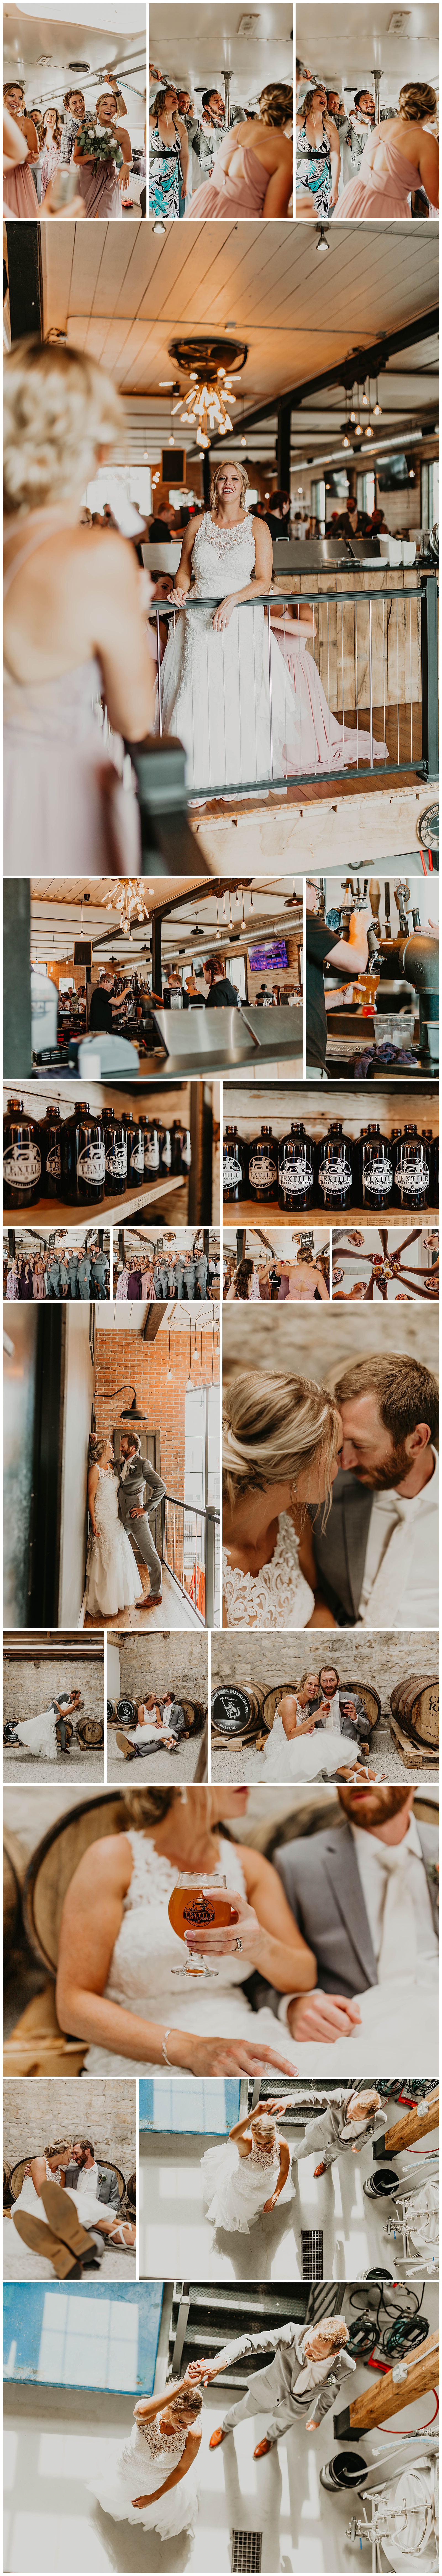 Iowa and Midwest wedding and destination photographer